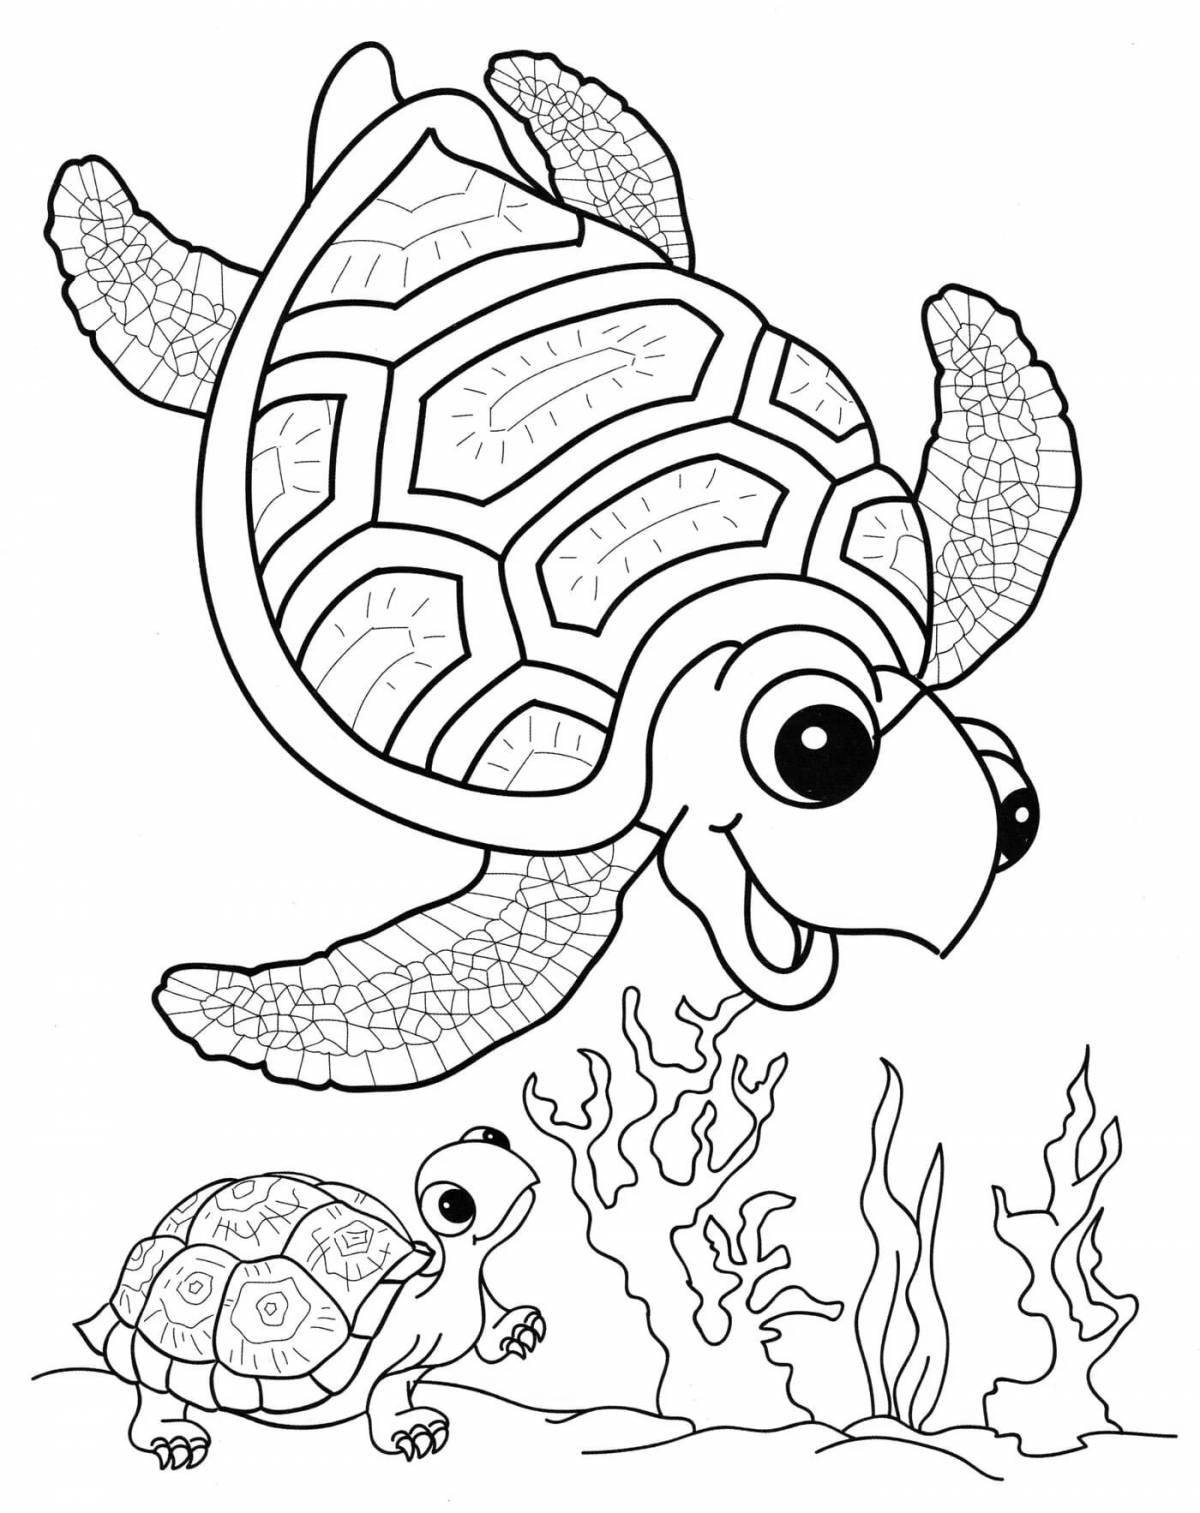 Coloring sea turtle explosion for kids